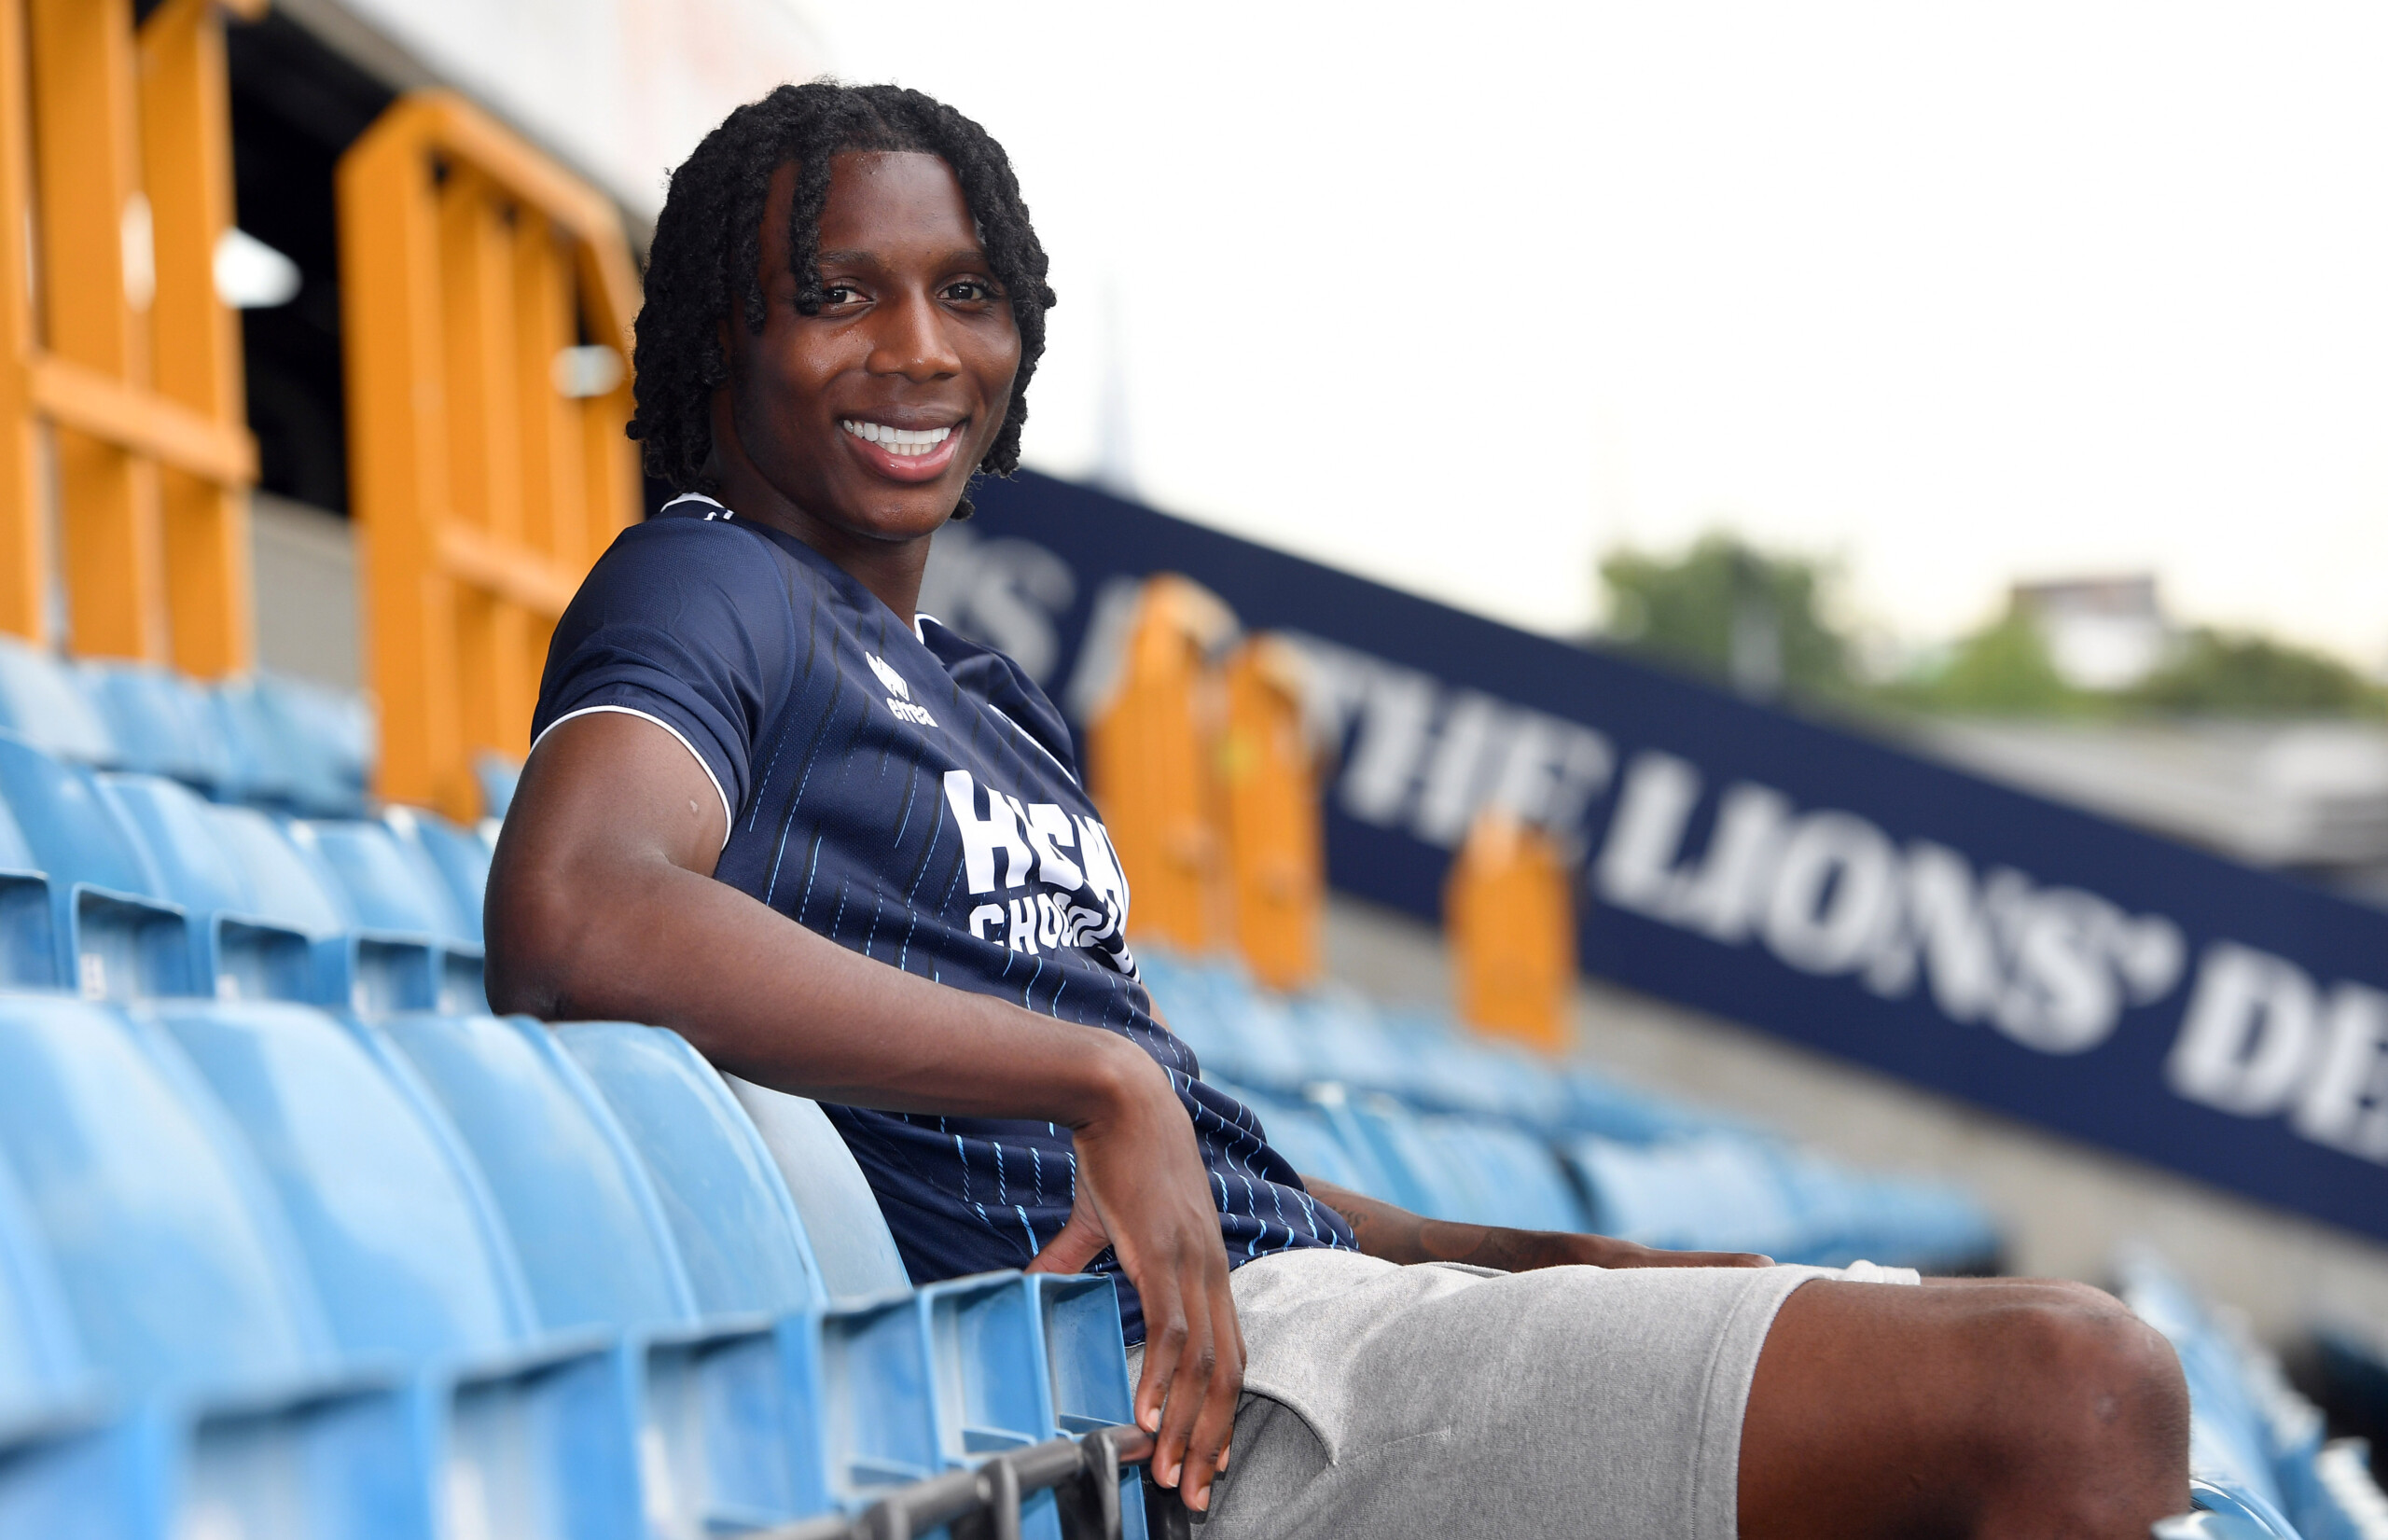 Brooke Norton Cuffy on how the training ground has become his